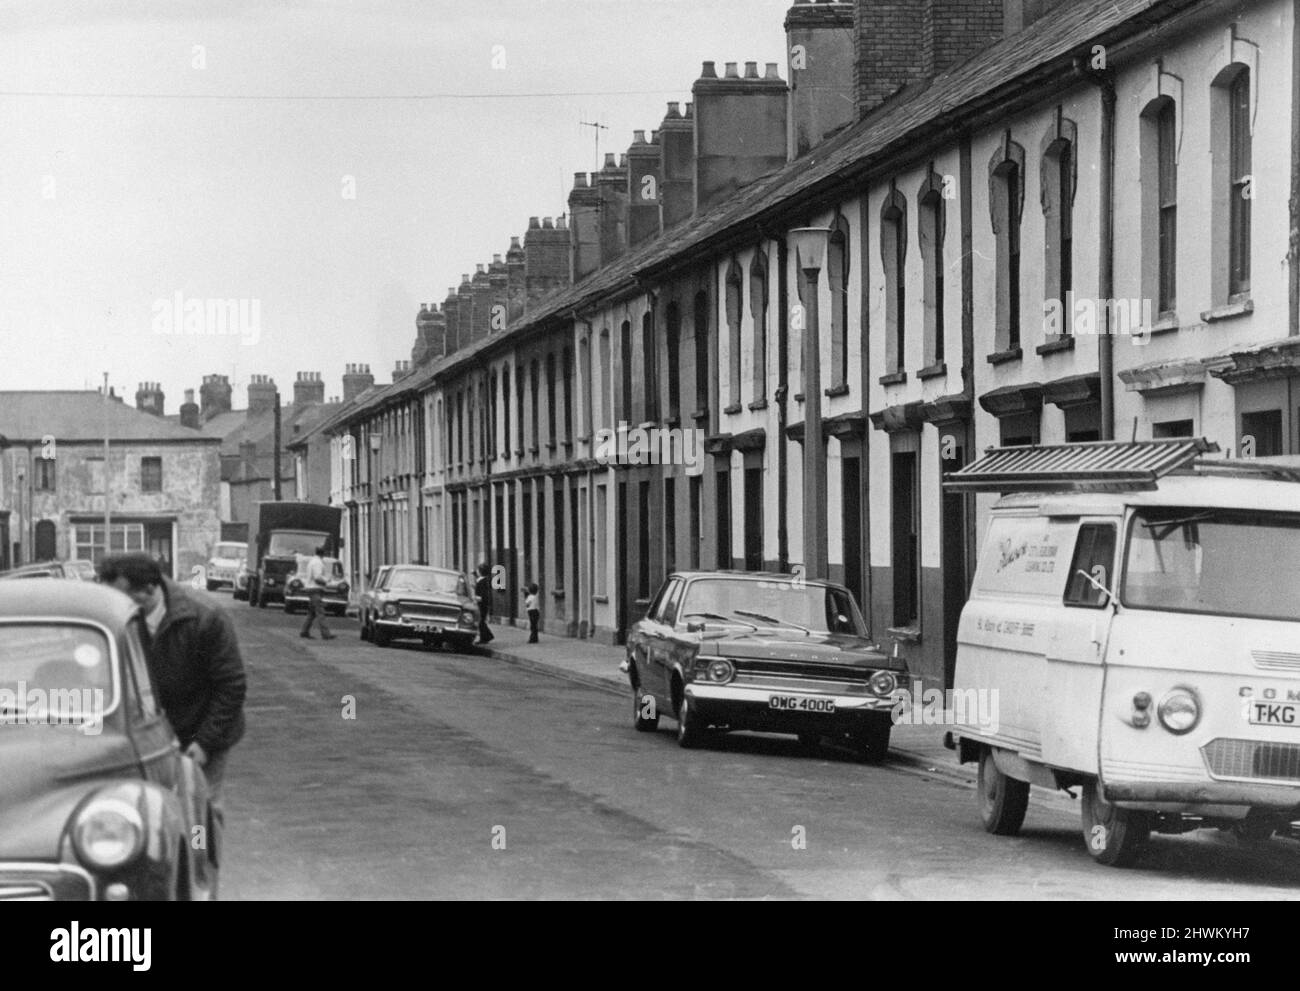 Eclipse Street in Adamsdown, an inner city area and community in the south of Cardiff, Wales. 26th November 1972. Stock Photo